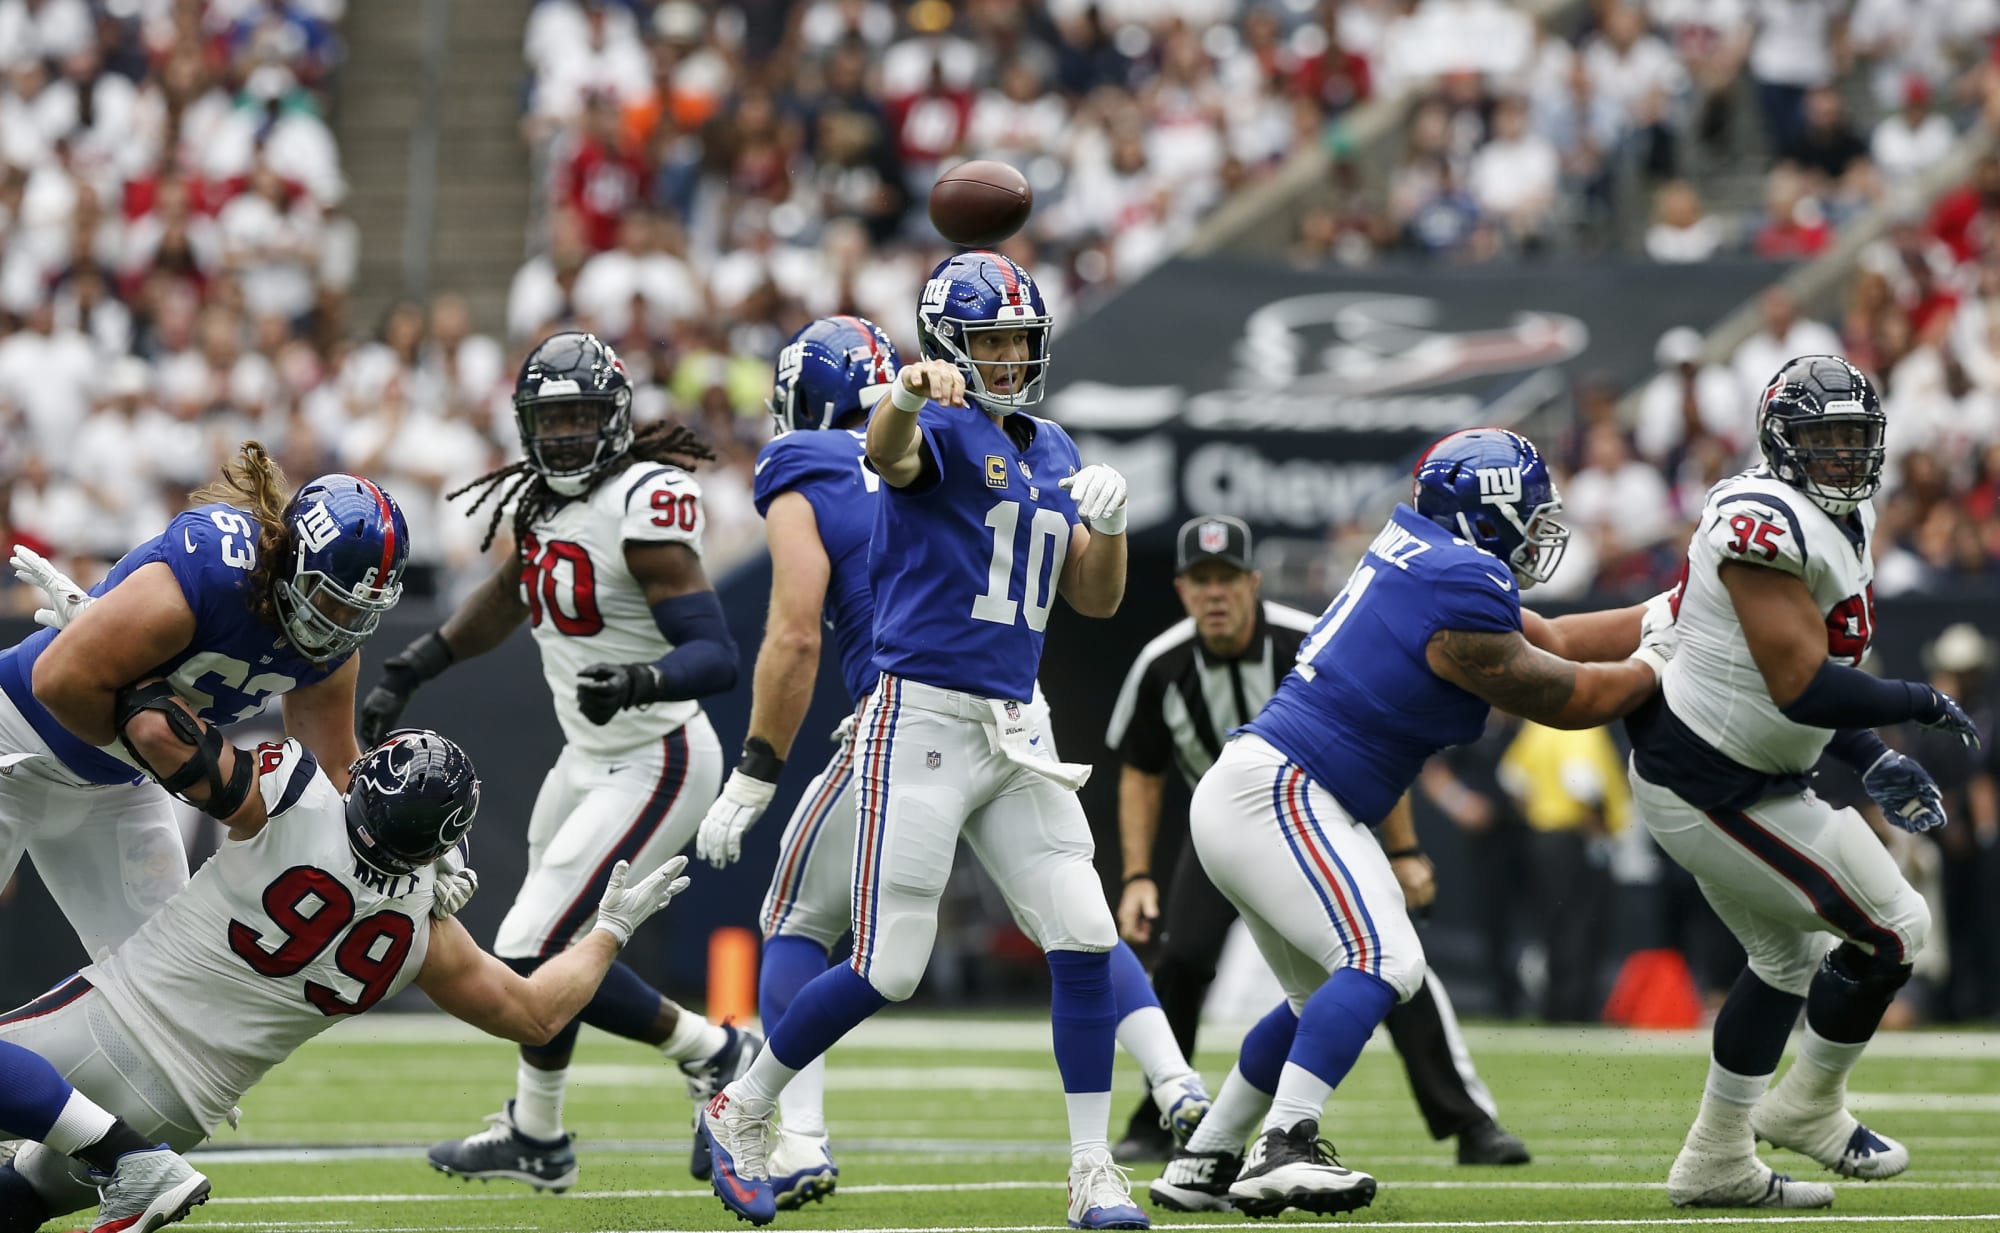 New York Giants Parlaying Manning's strengths means victory